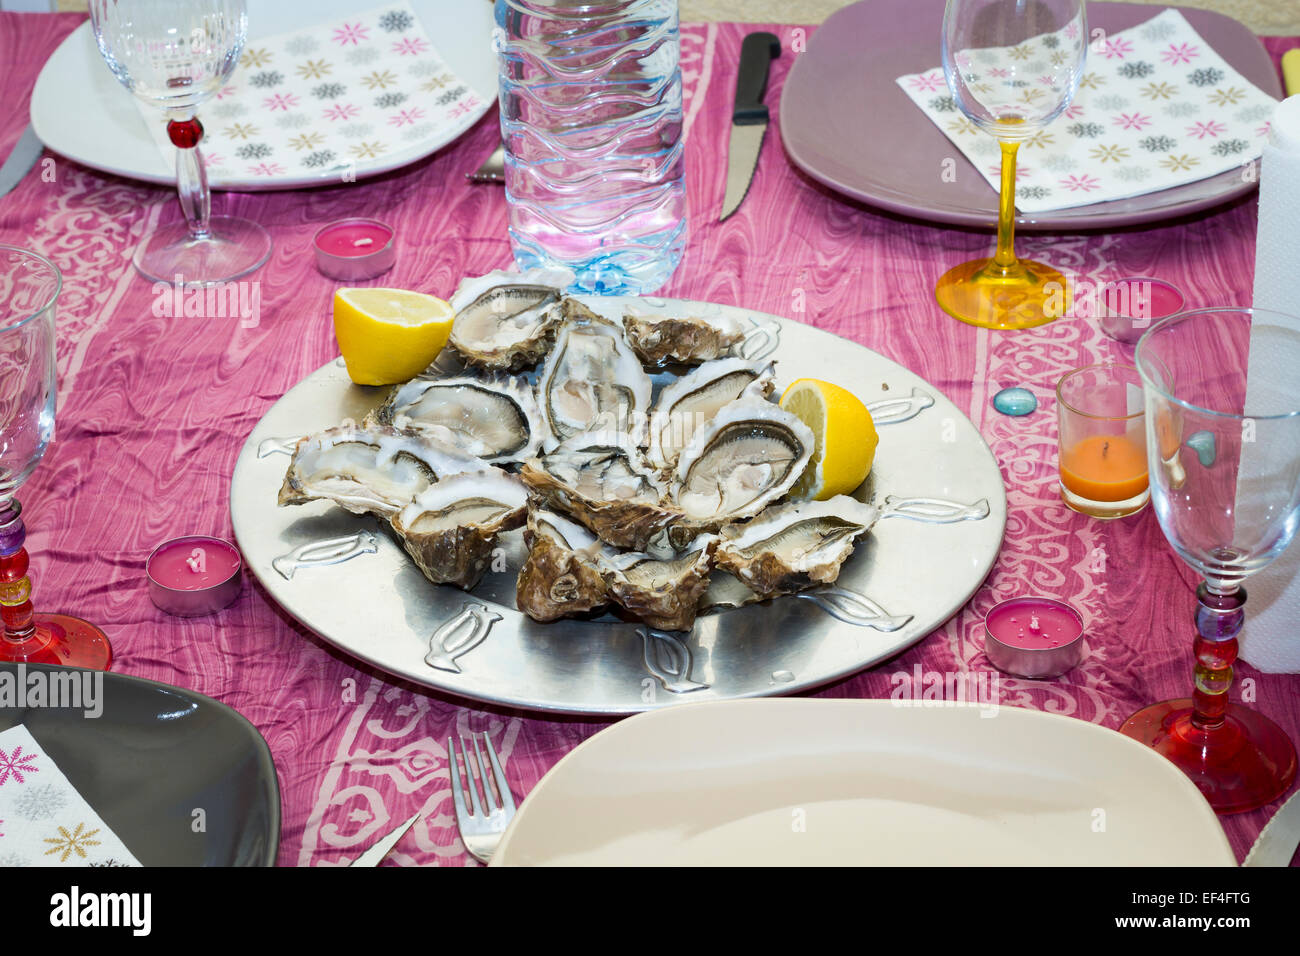 Oysters and lemon wedges on a set table. Stock Photo